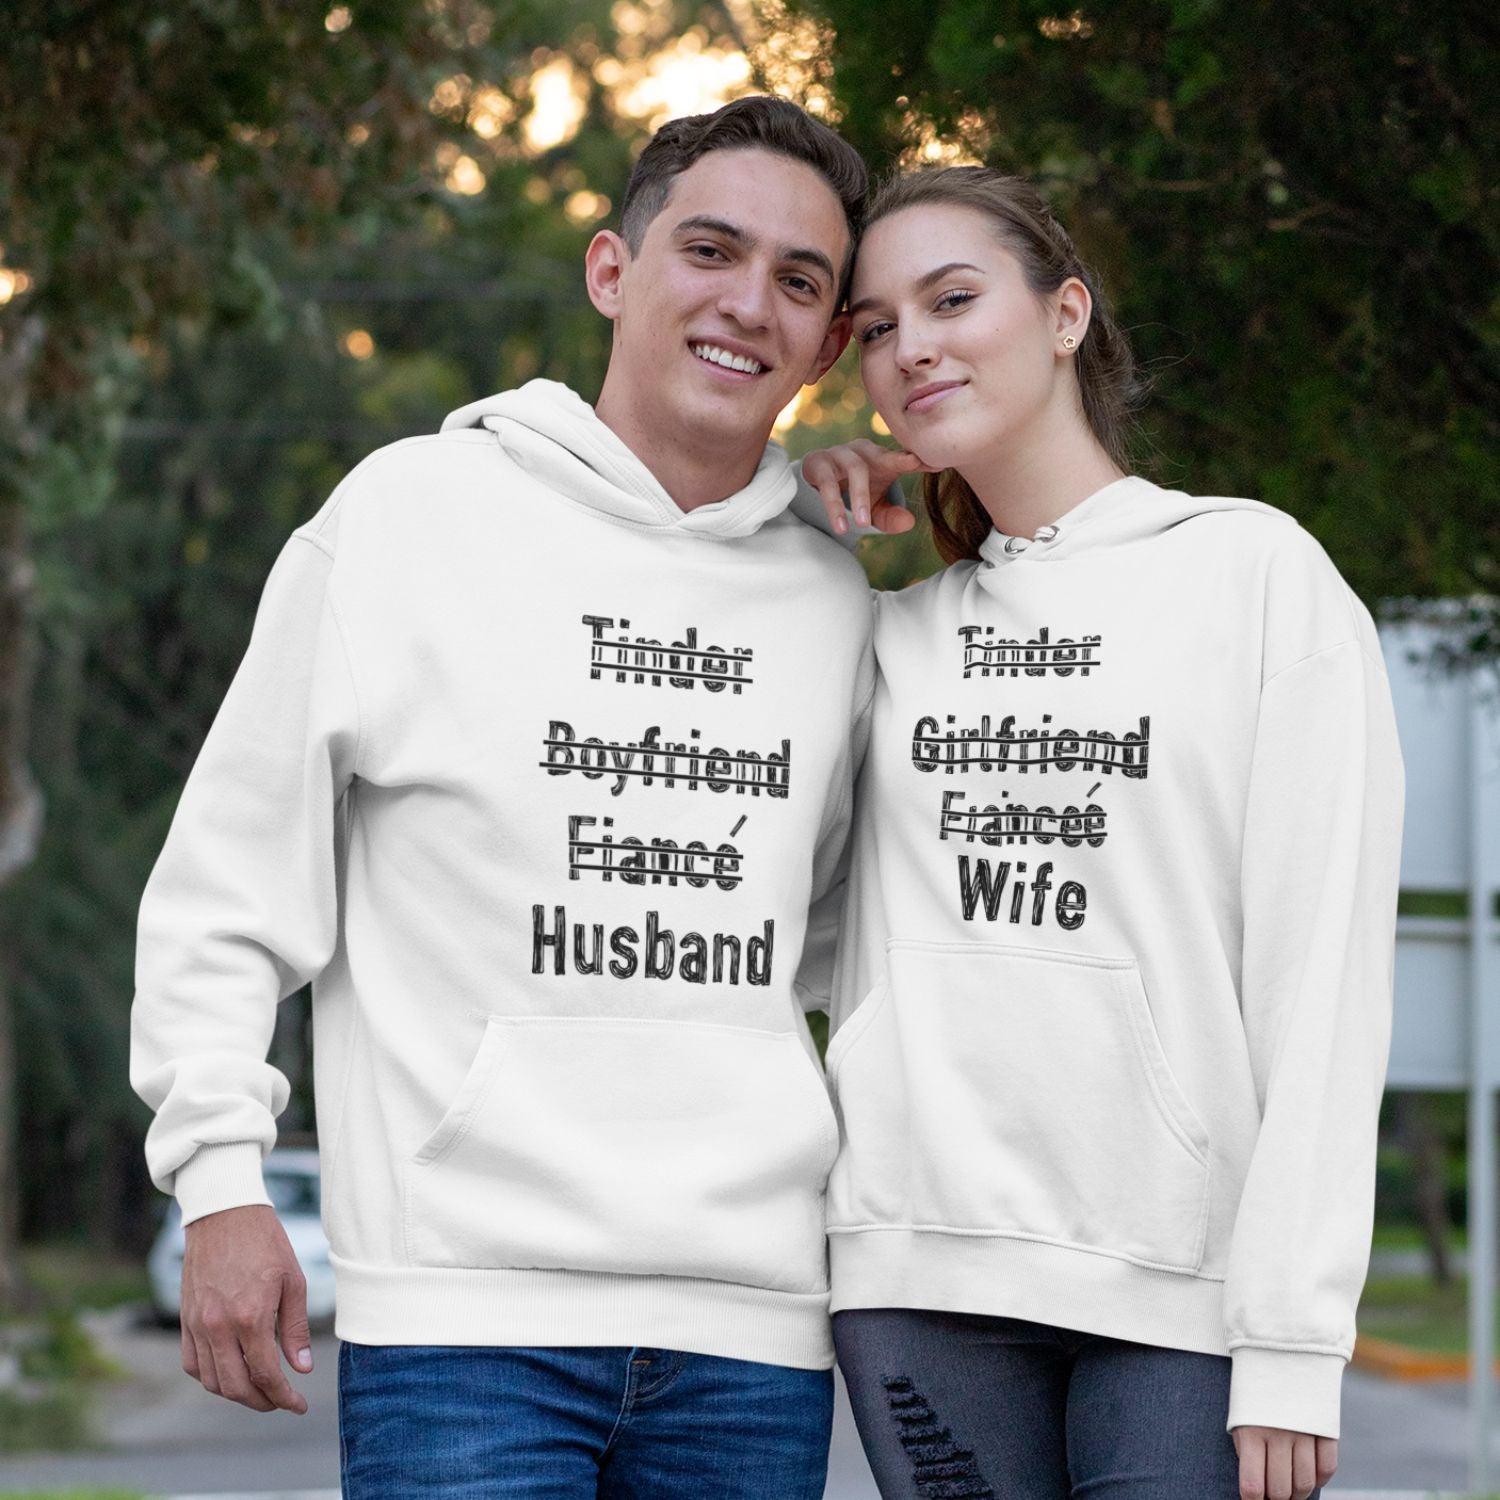 Online Dating Couple Matching Outfits - Cute Tinder Match Outfits for Couples T-shirts